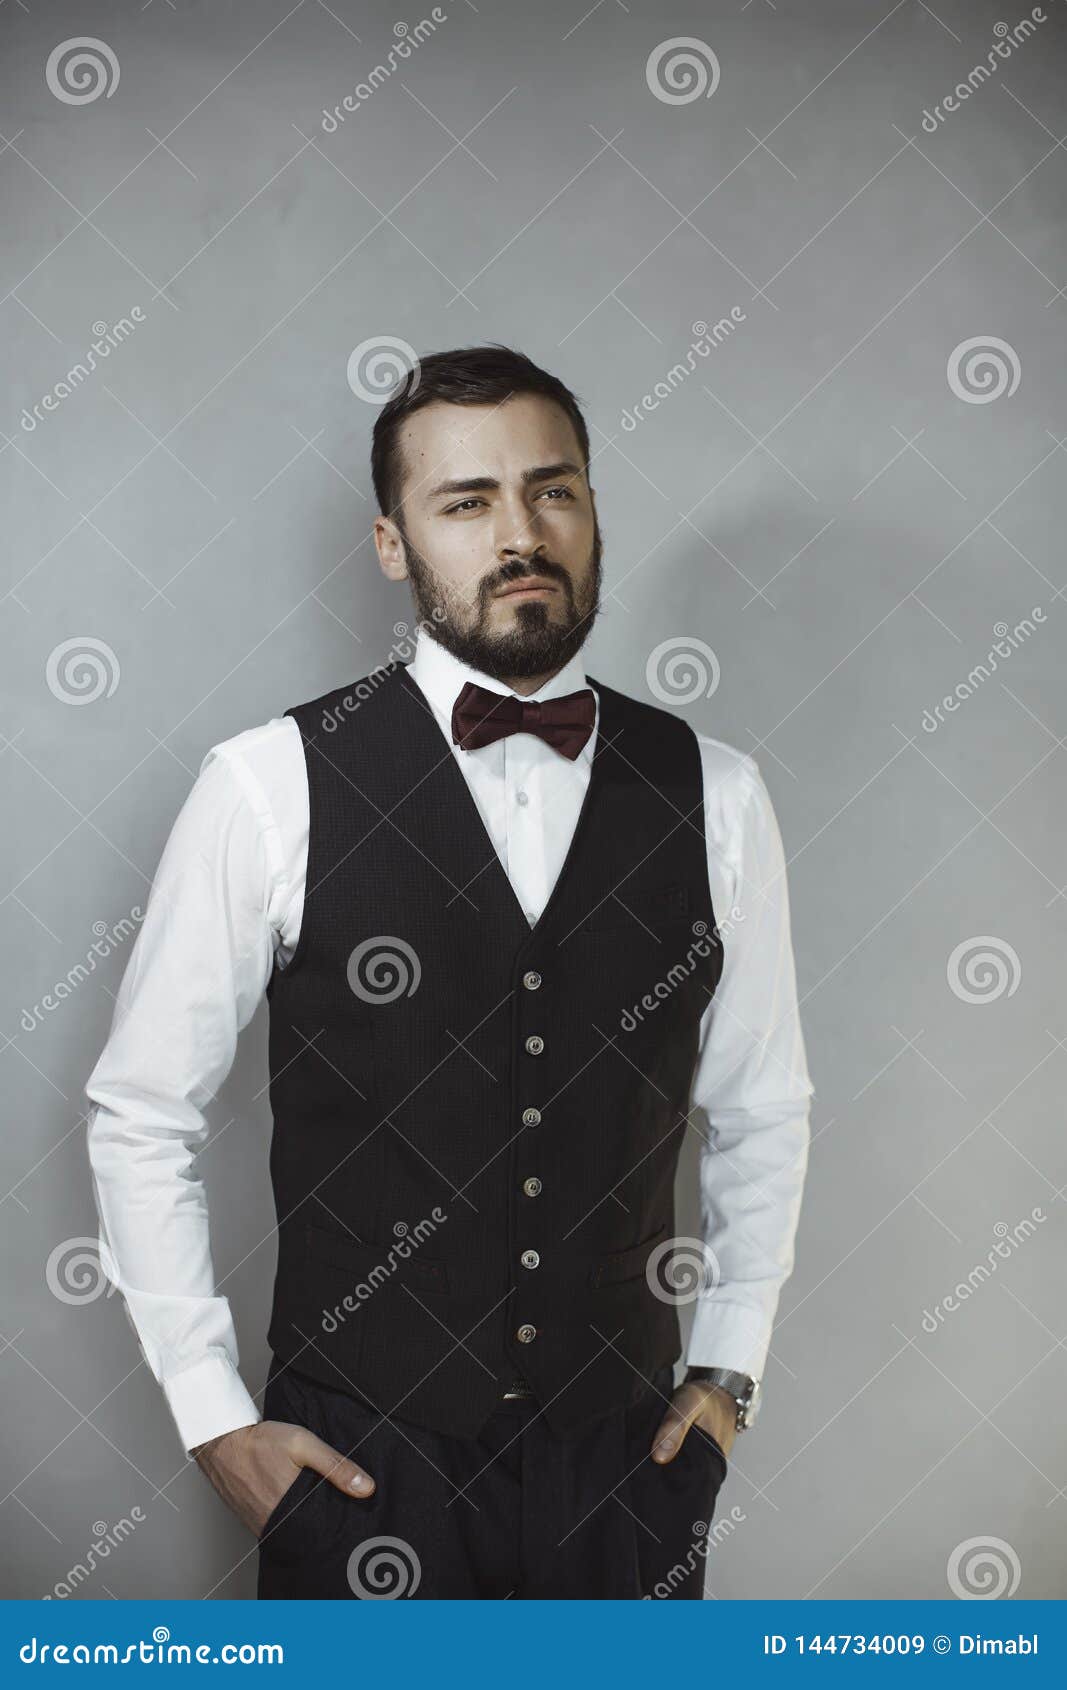 Smiling Man in Black Vest and Bow Tie Stock Image - Image of black ...